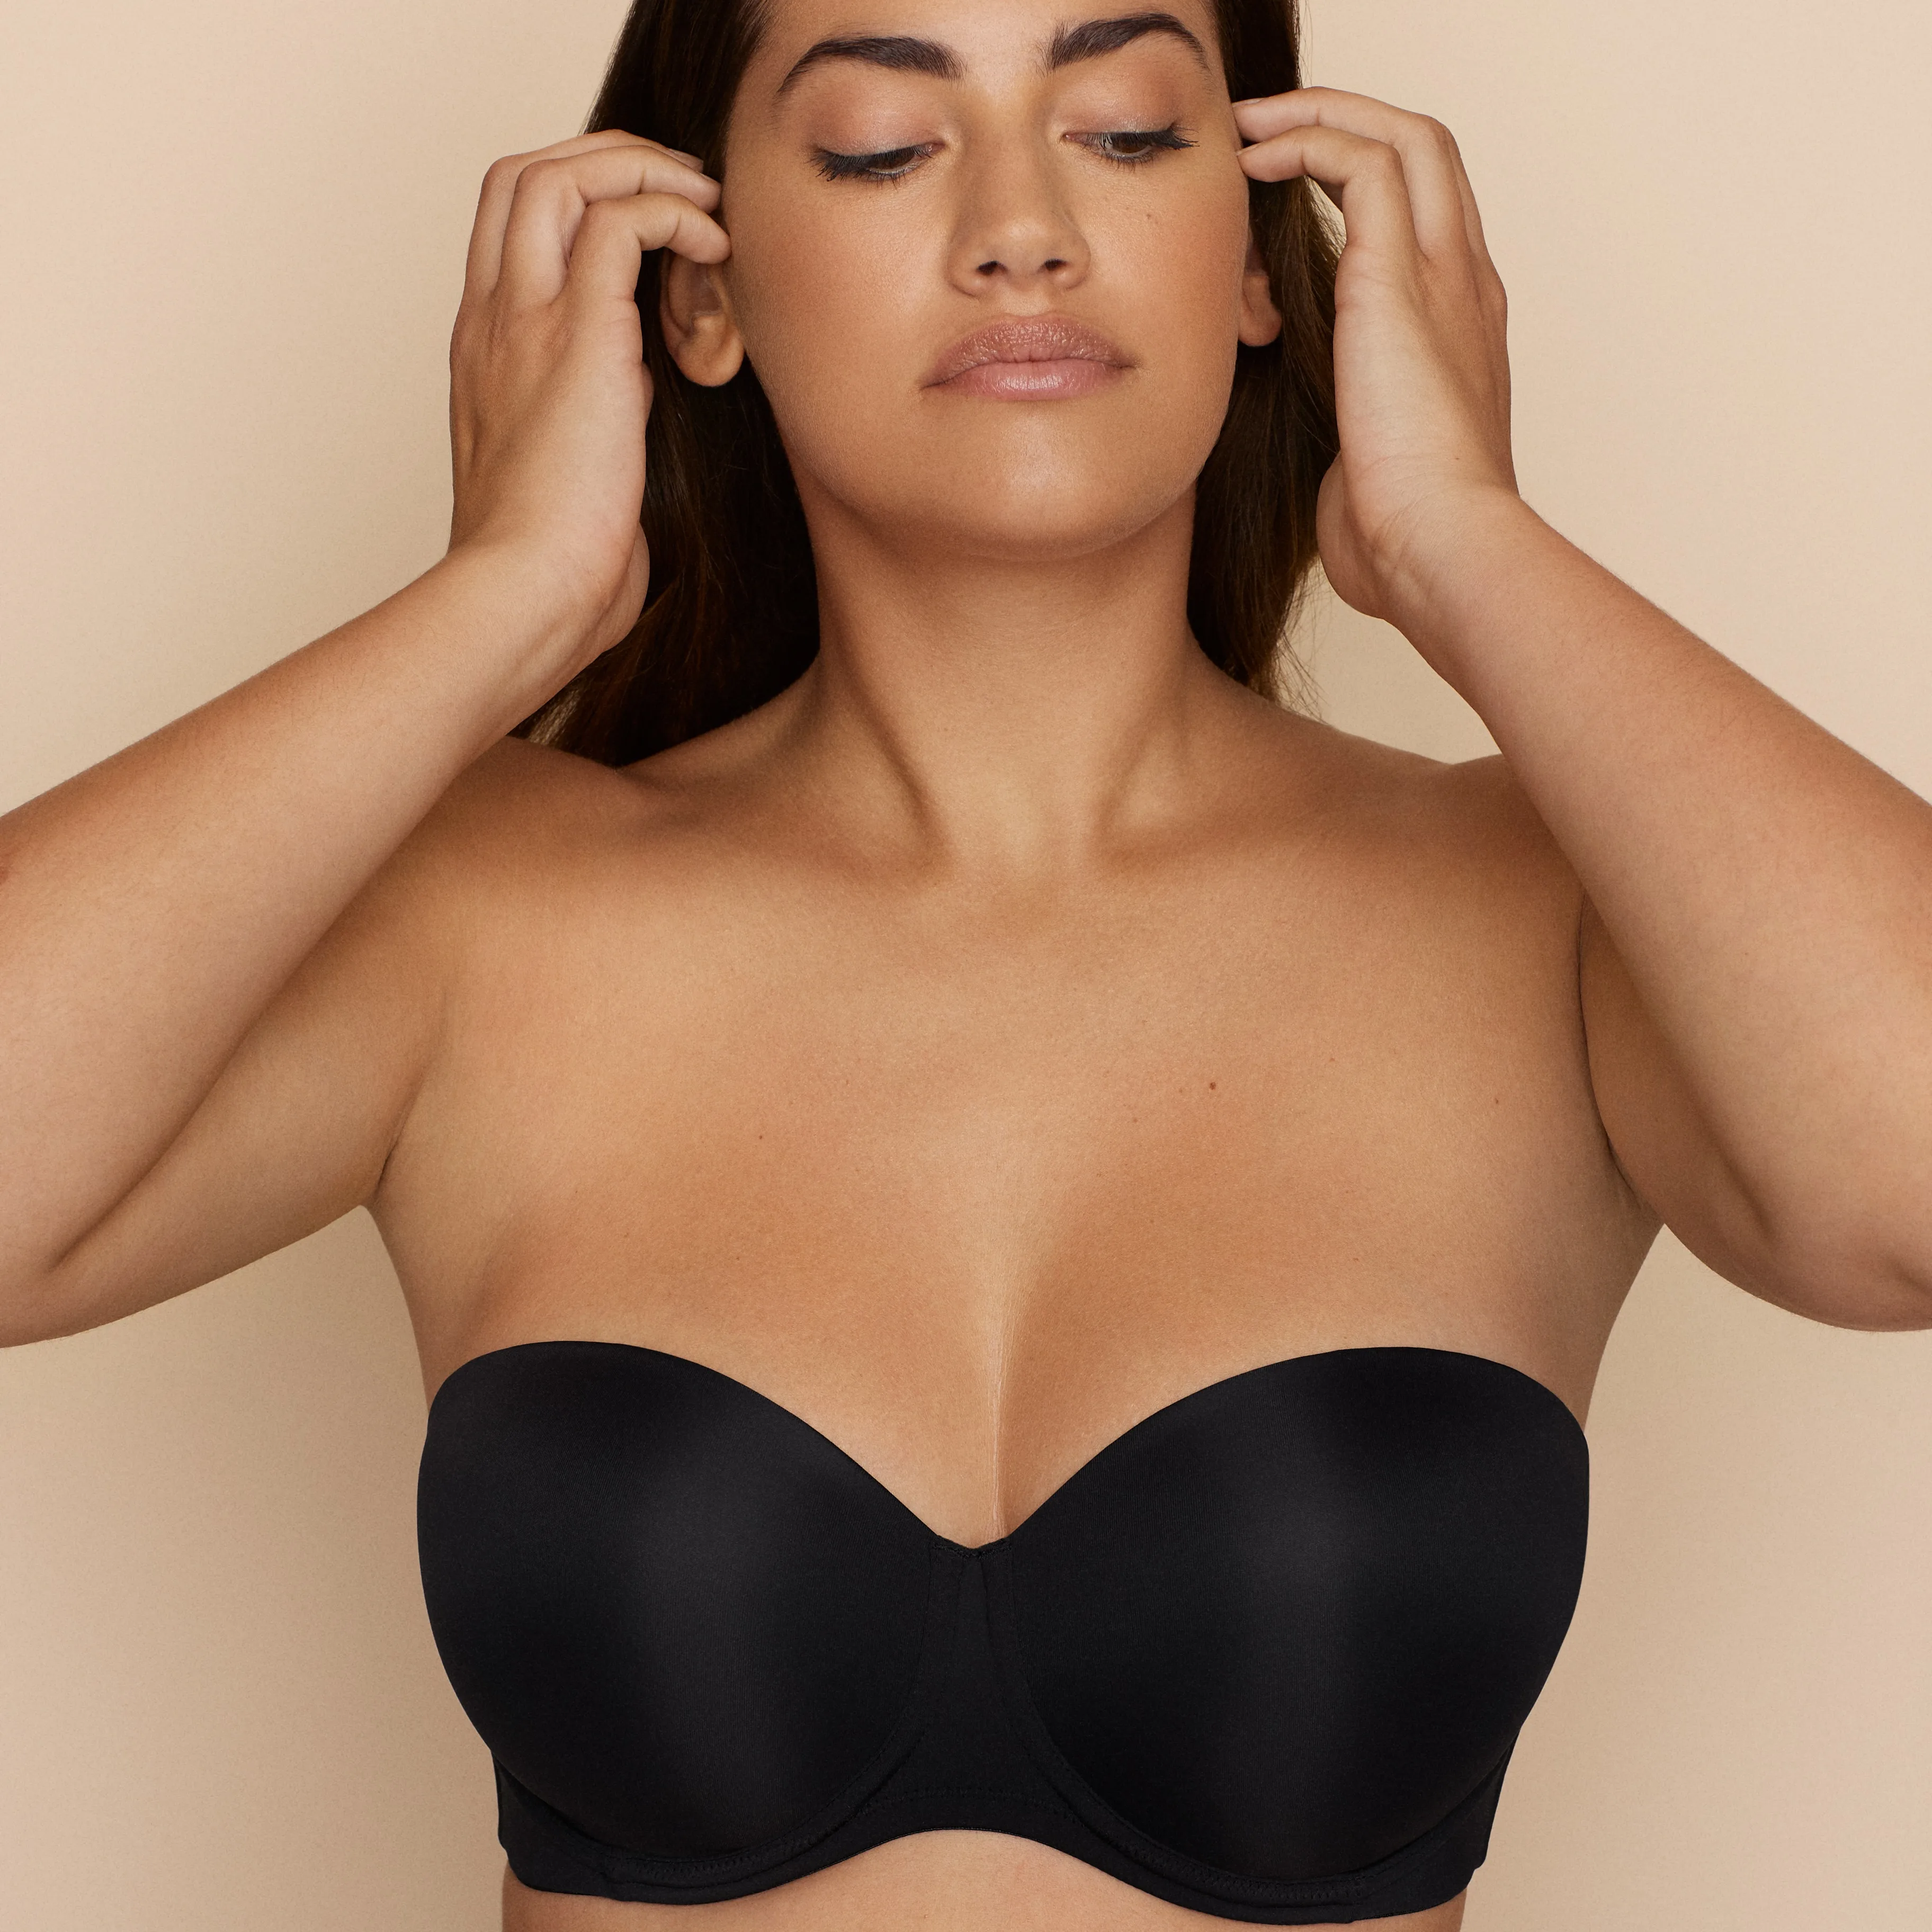 The most common bra struggles for women with a larger cup size and